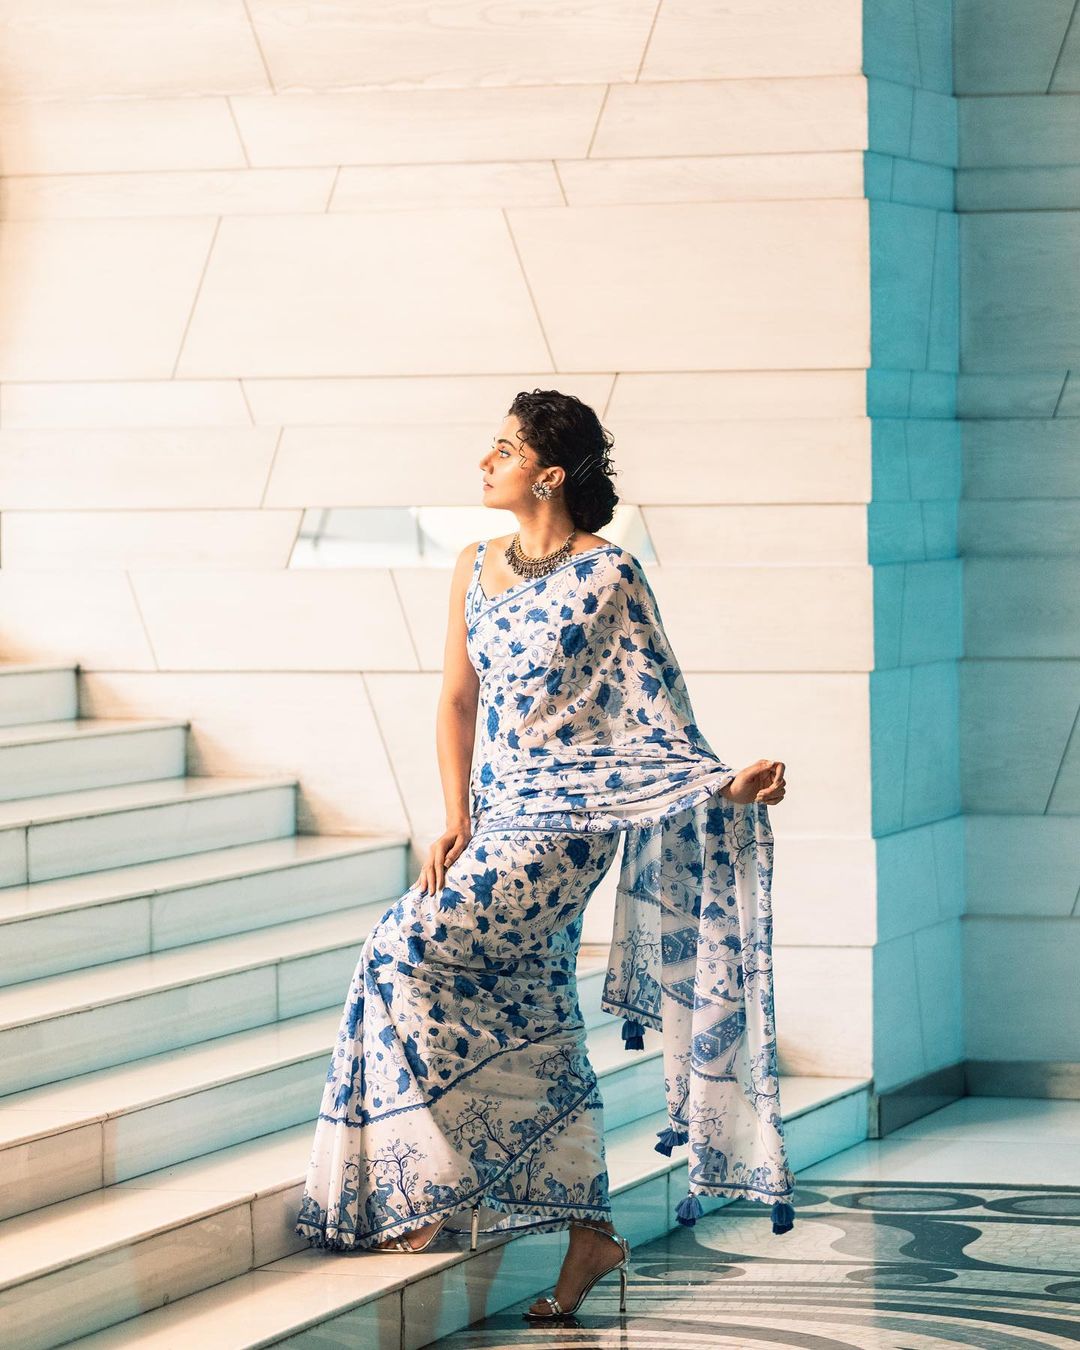 Taapsee Pannu is a sight to behold in a white and blue floral saree